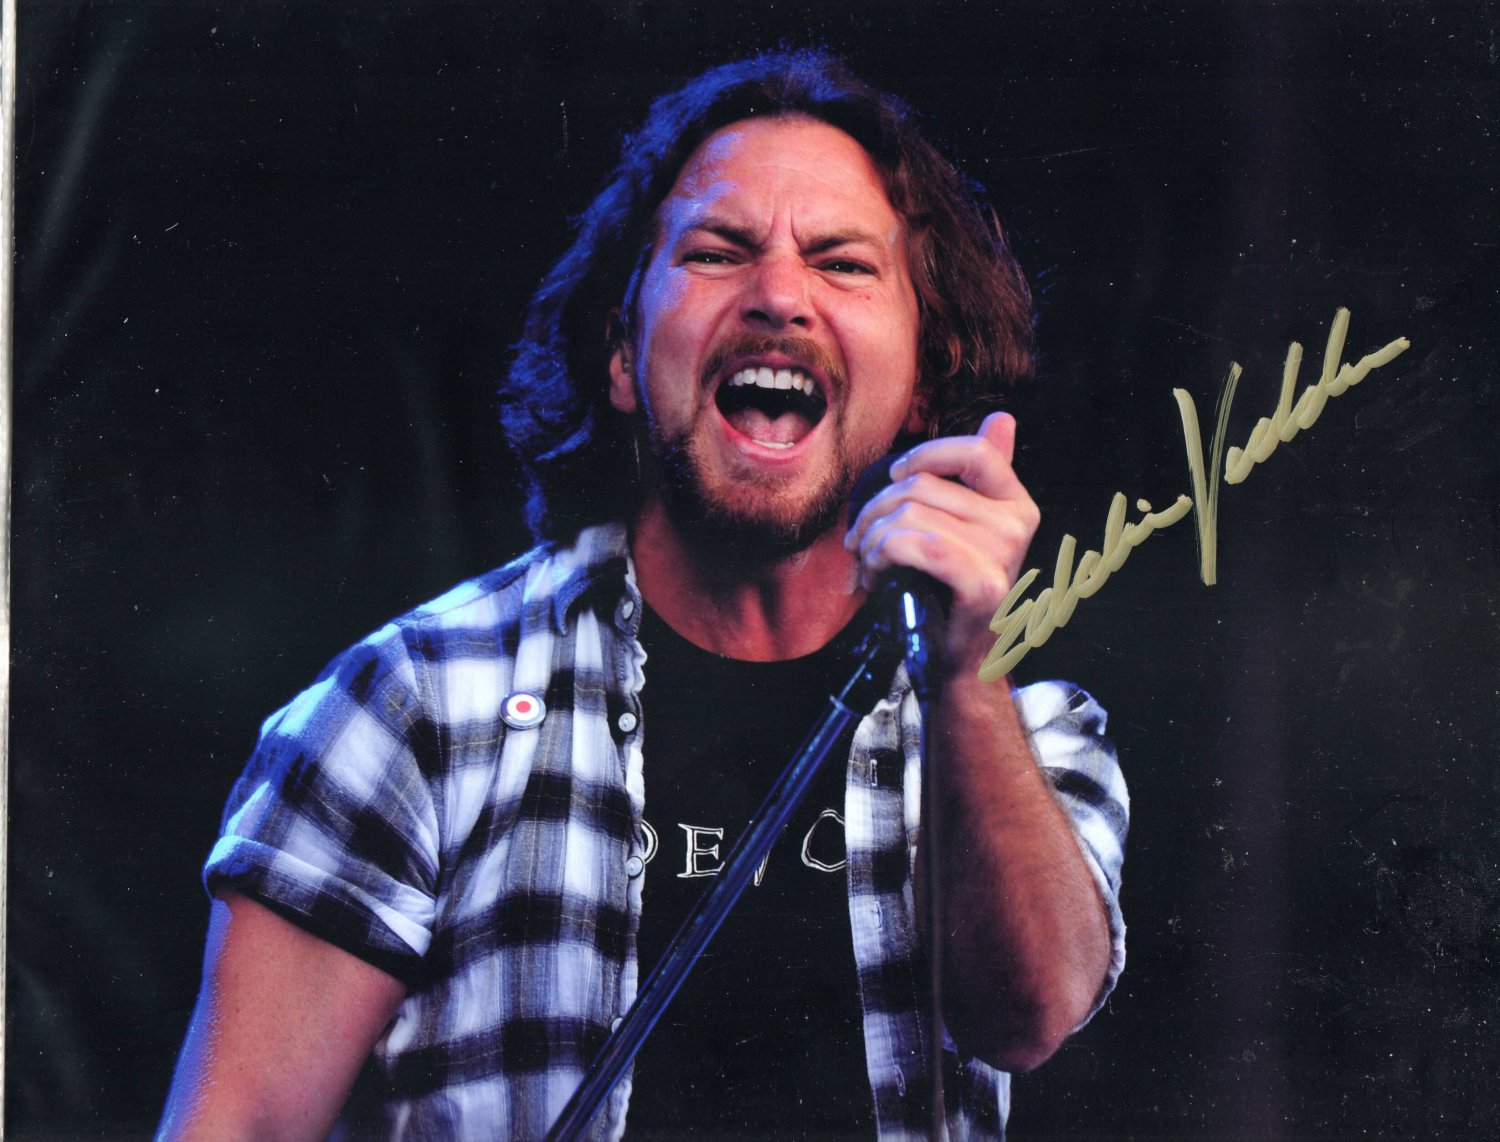 EDDIE VEDDER - LEAD SINGER PEARL JAM - ROCK HALL OF FAME - HAND SIGNED AUTOGRAPHED PHOTO WITH COA